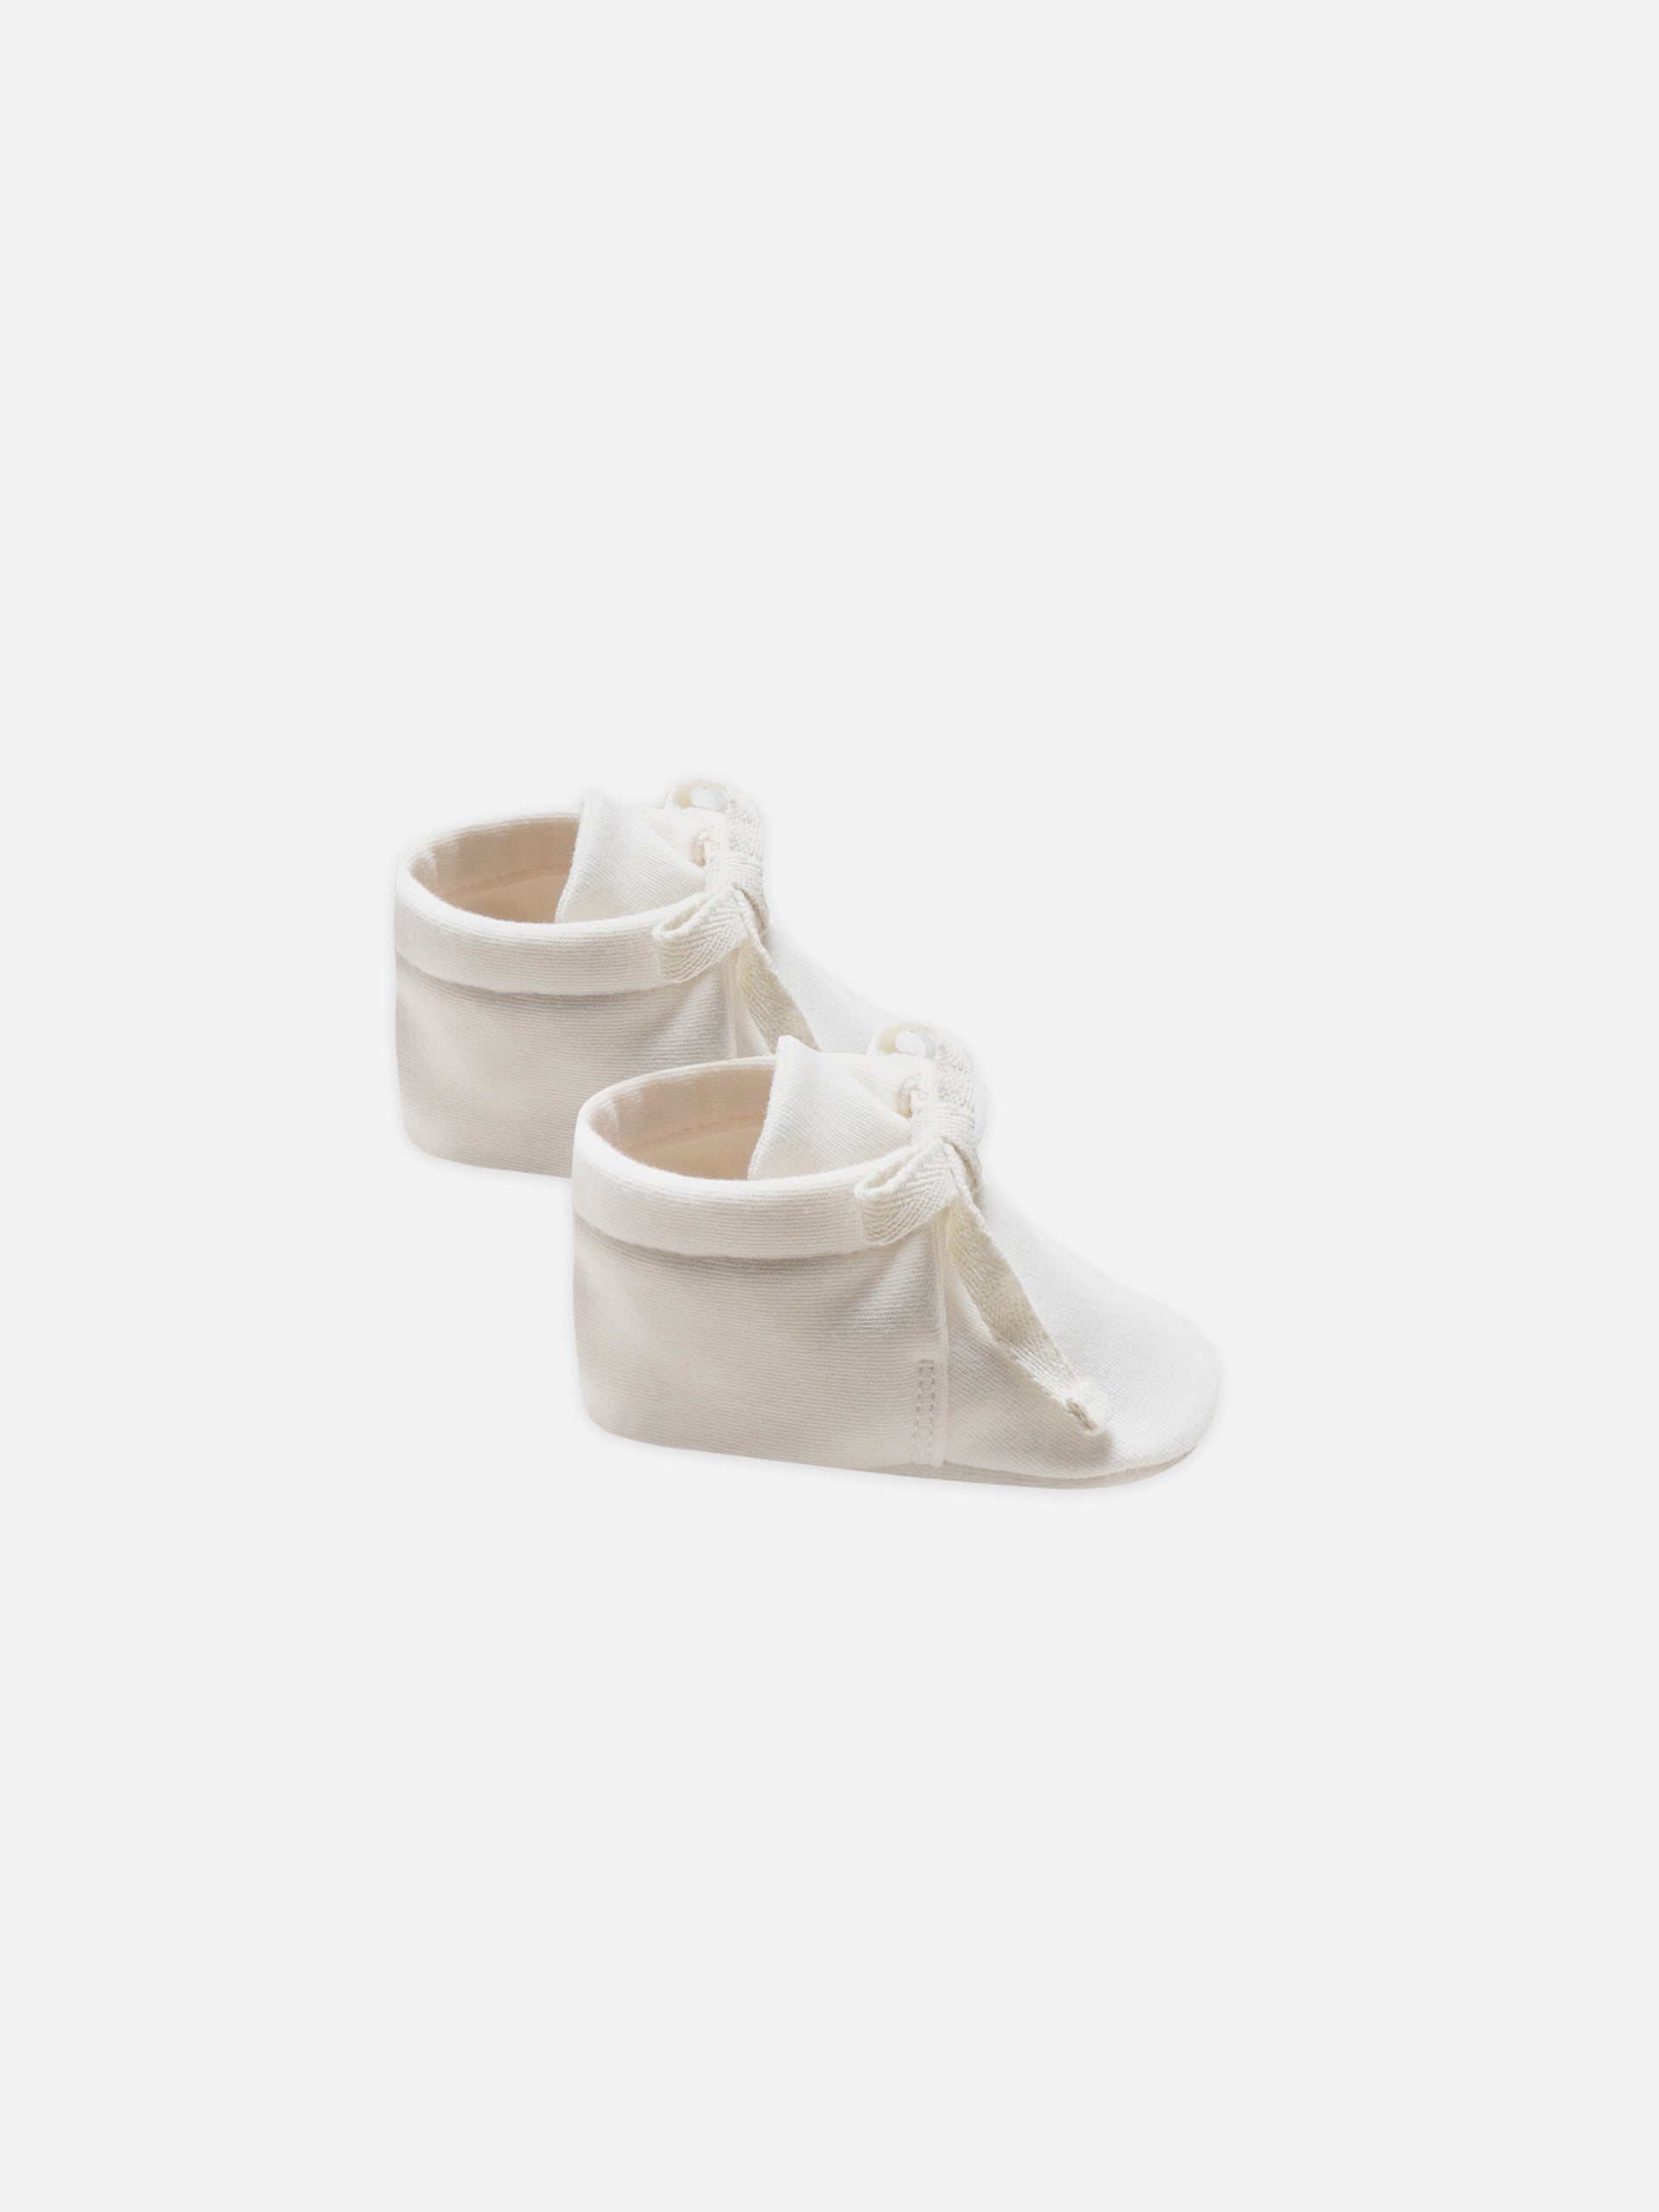 Baby Booties || Ivory - Rylee + Cru | Kids Clothes | Trendy Baby Clothes | Modern Infant Outfits |